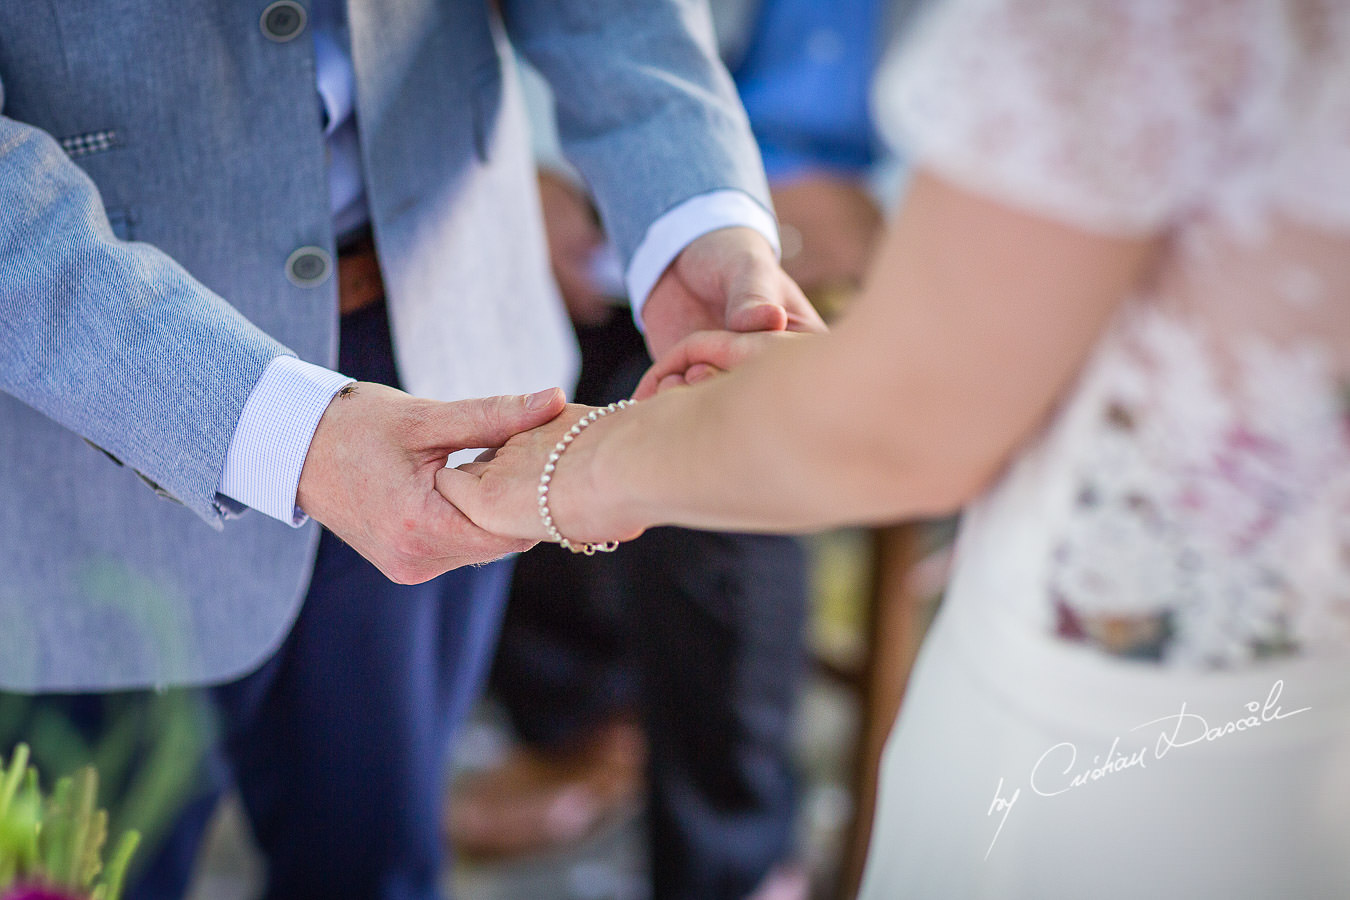 A beautiful wedding day at the Vasilias Nikoklis Inn in Paphos, captured by Cristian Dascalu. Ceremony moments.